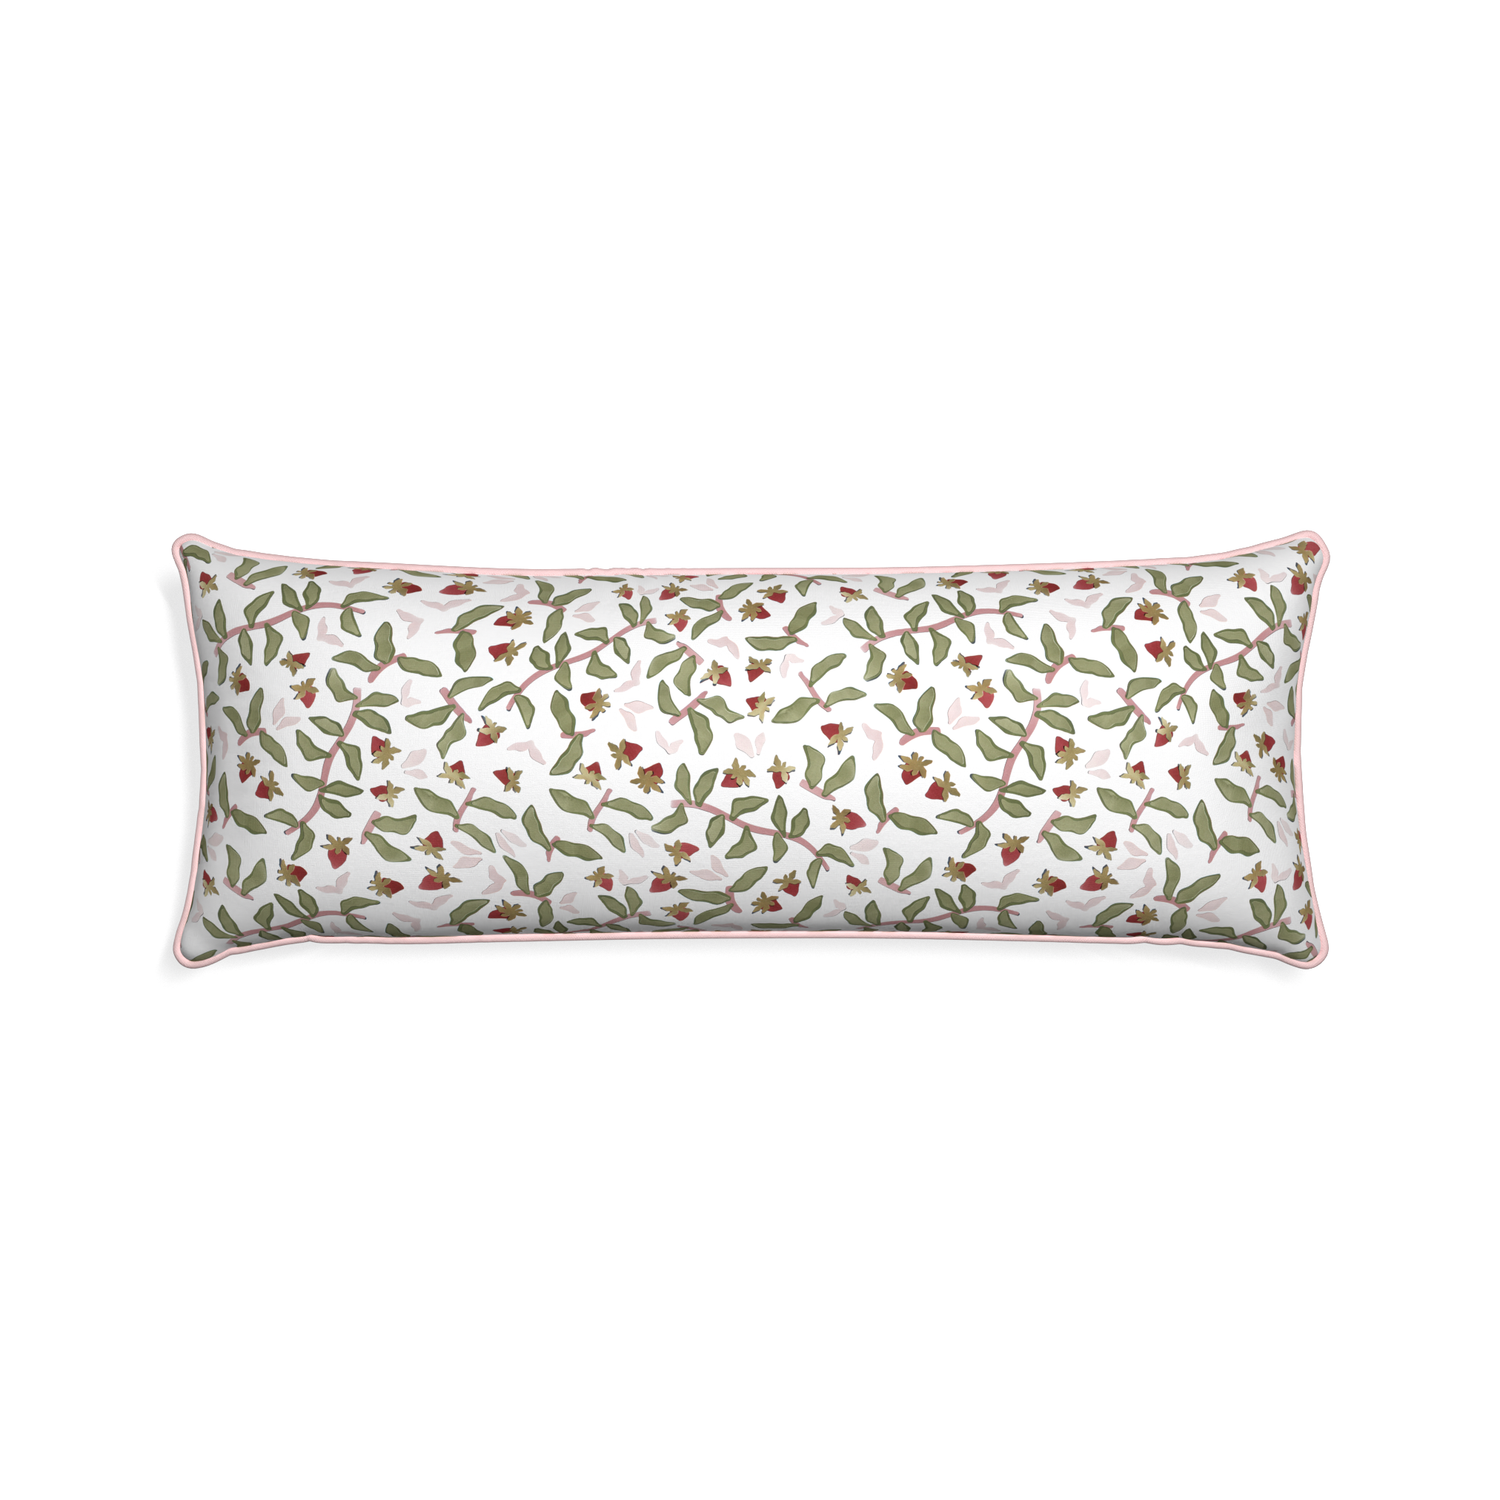 Xl-lumbar nellie custom pillow with petal piping on white background